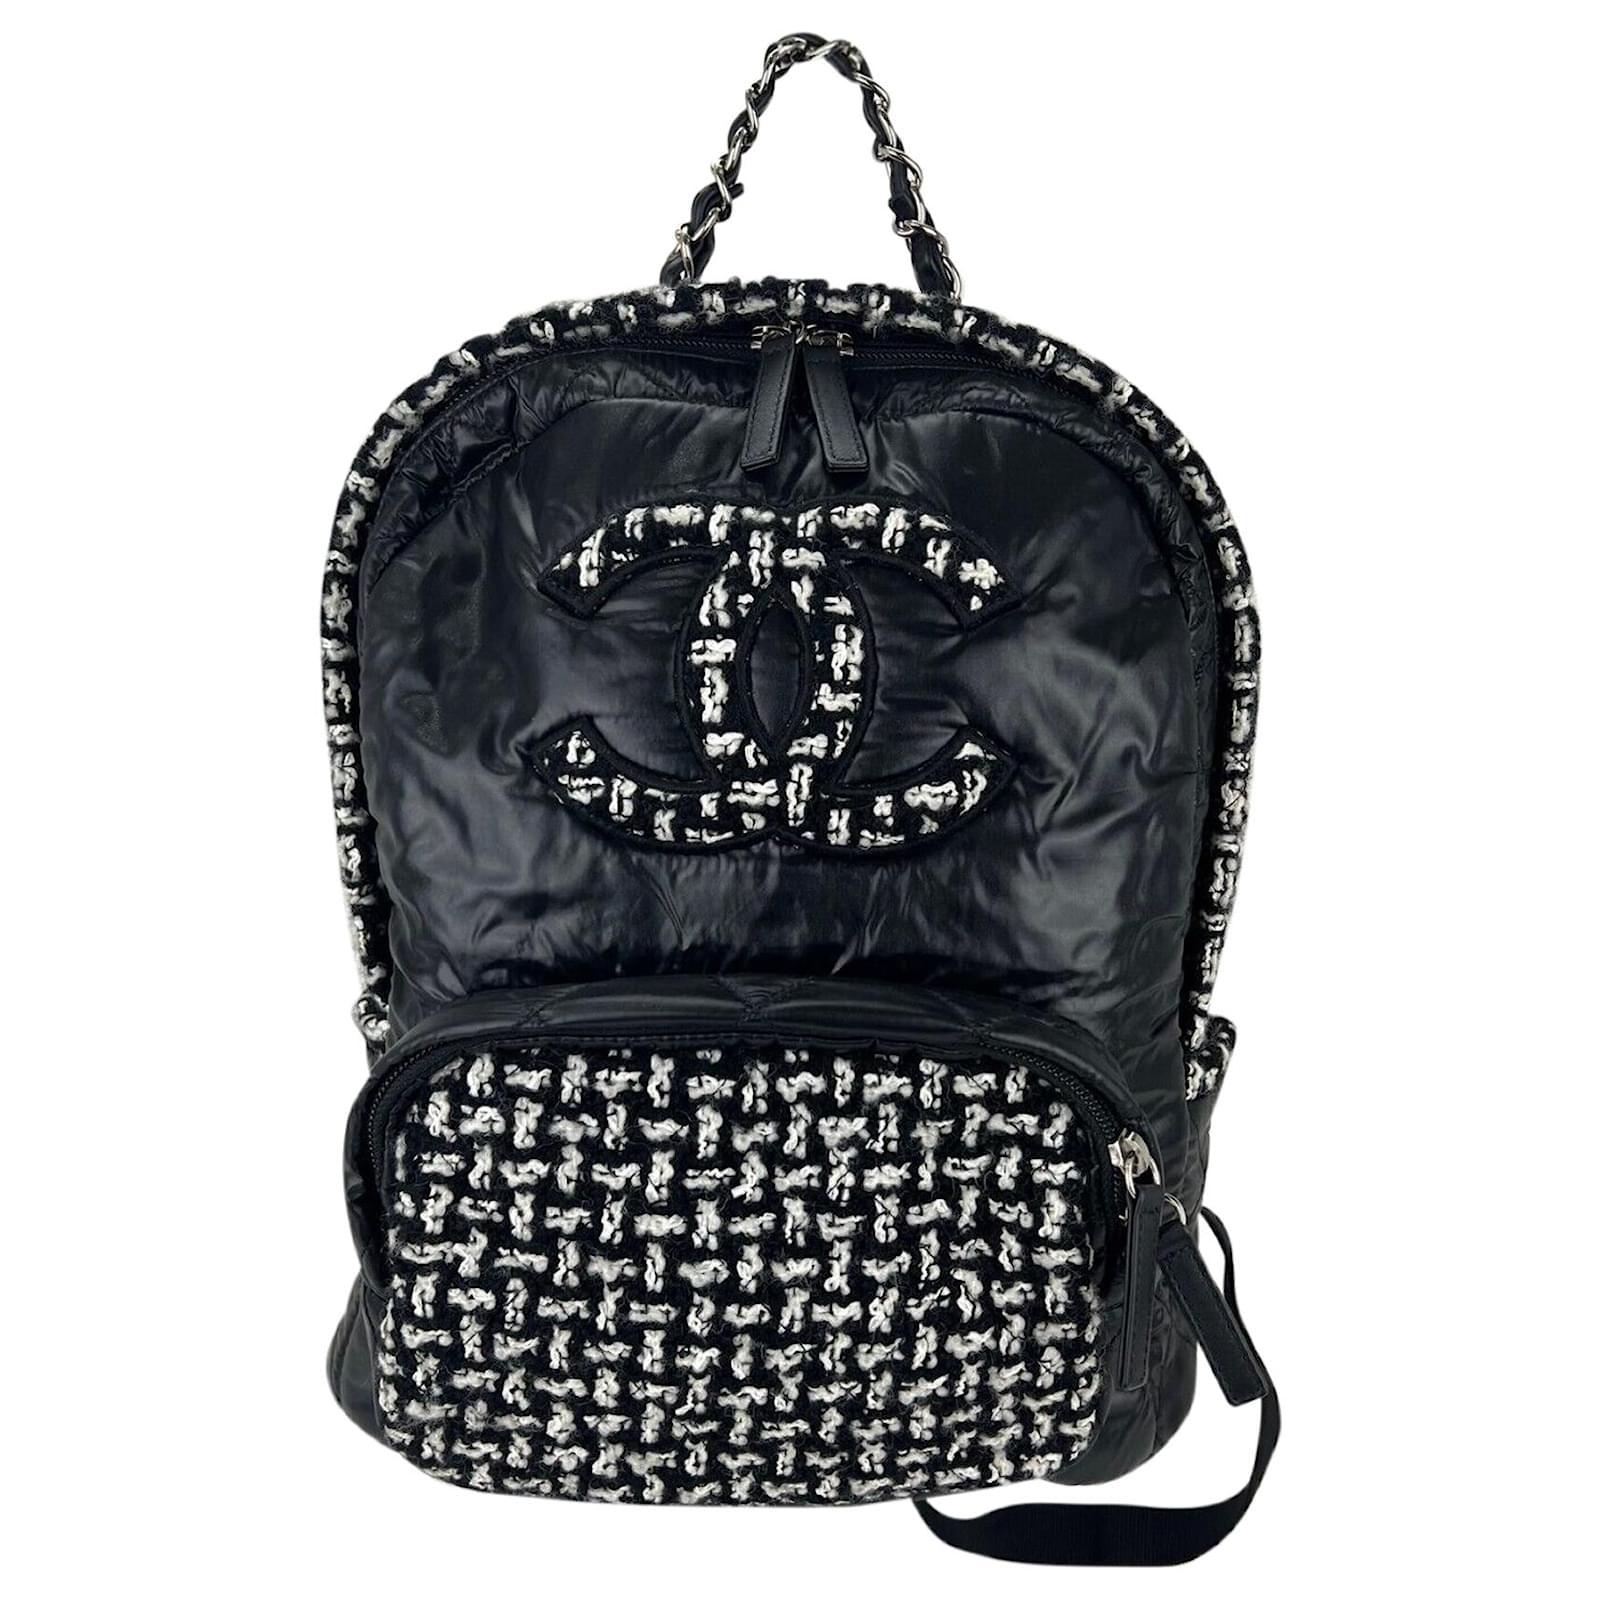 Chanel Backpack Quilted Nylon And Cc Tweed Black White Backpack